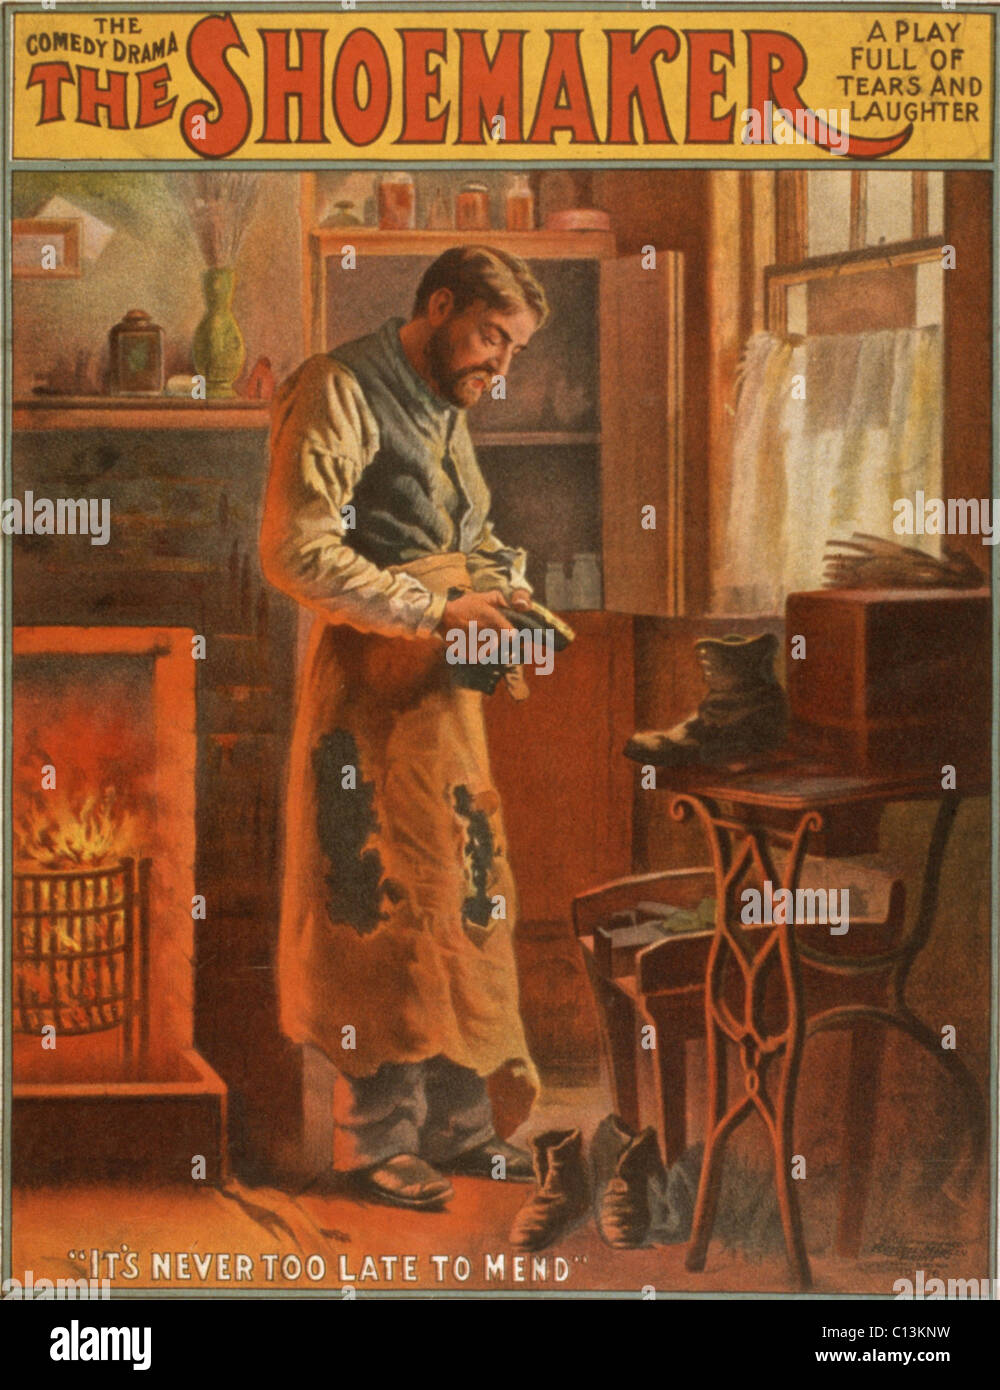 Theatrical poster for a comedy-drama entitled THE SHOEMAKER. Ca. 1907. Stock Photo